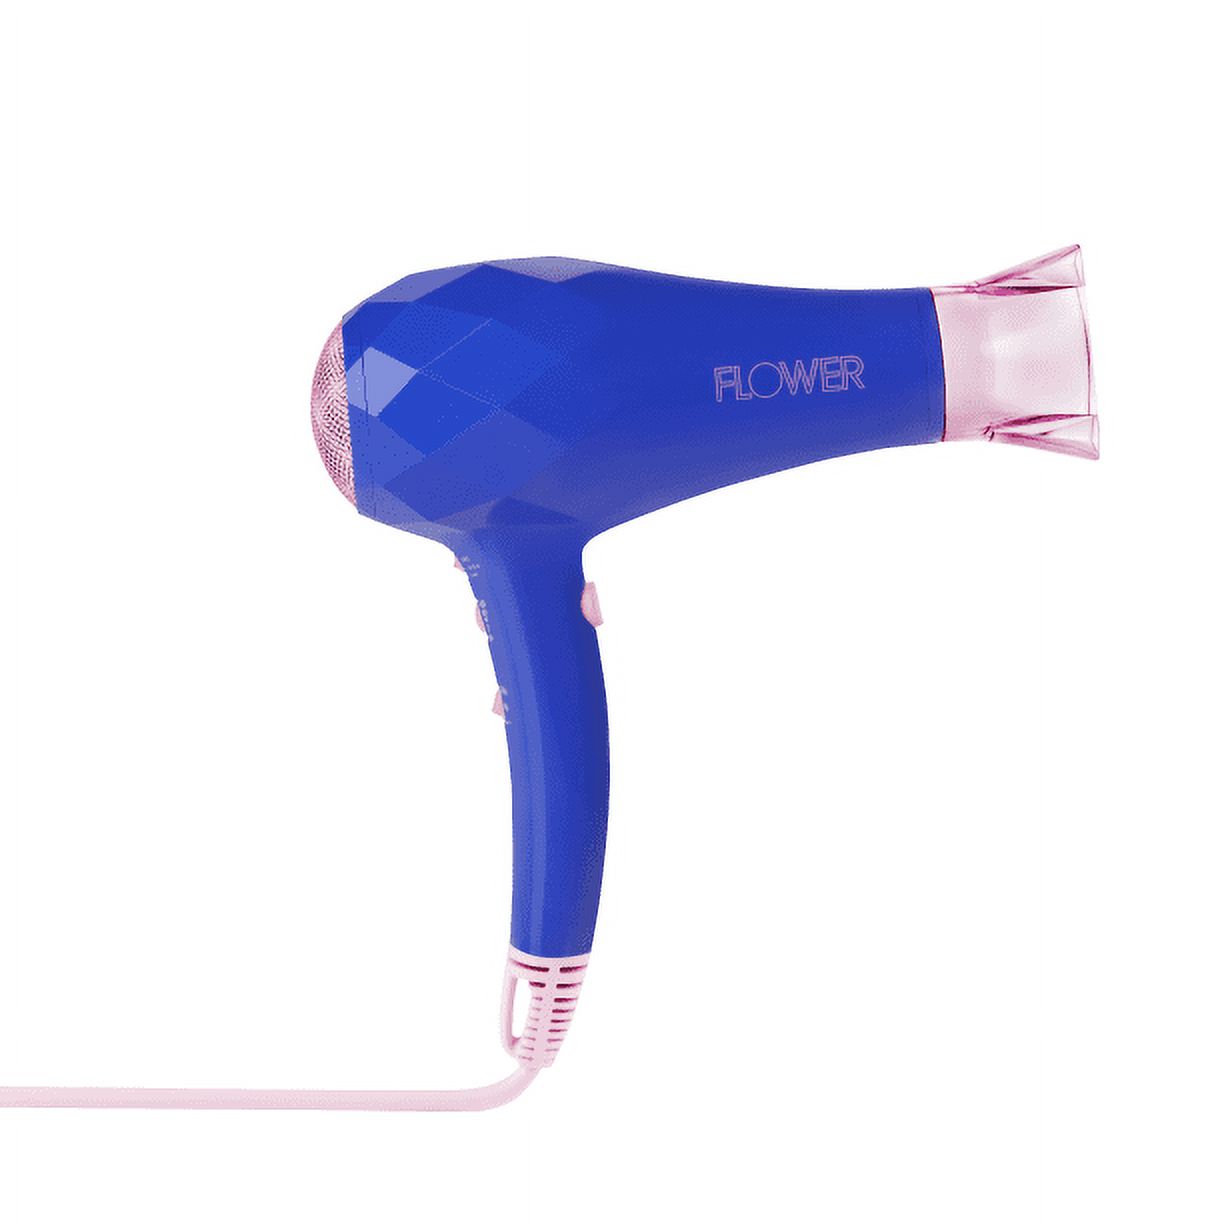 FLOWER Professional Ionic Hair Dryer with Concentrator, Ionic, 2000 Watts, Blue - image 1 of 11